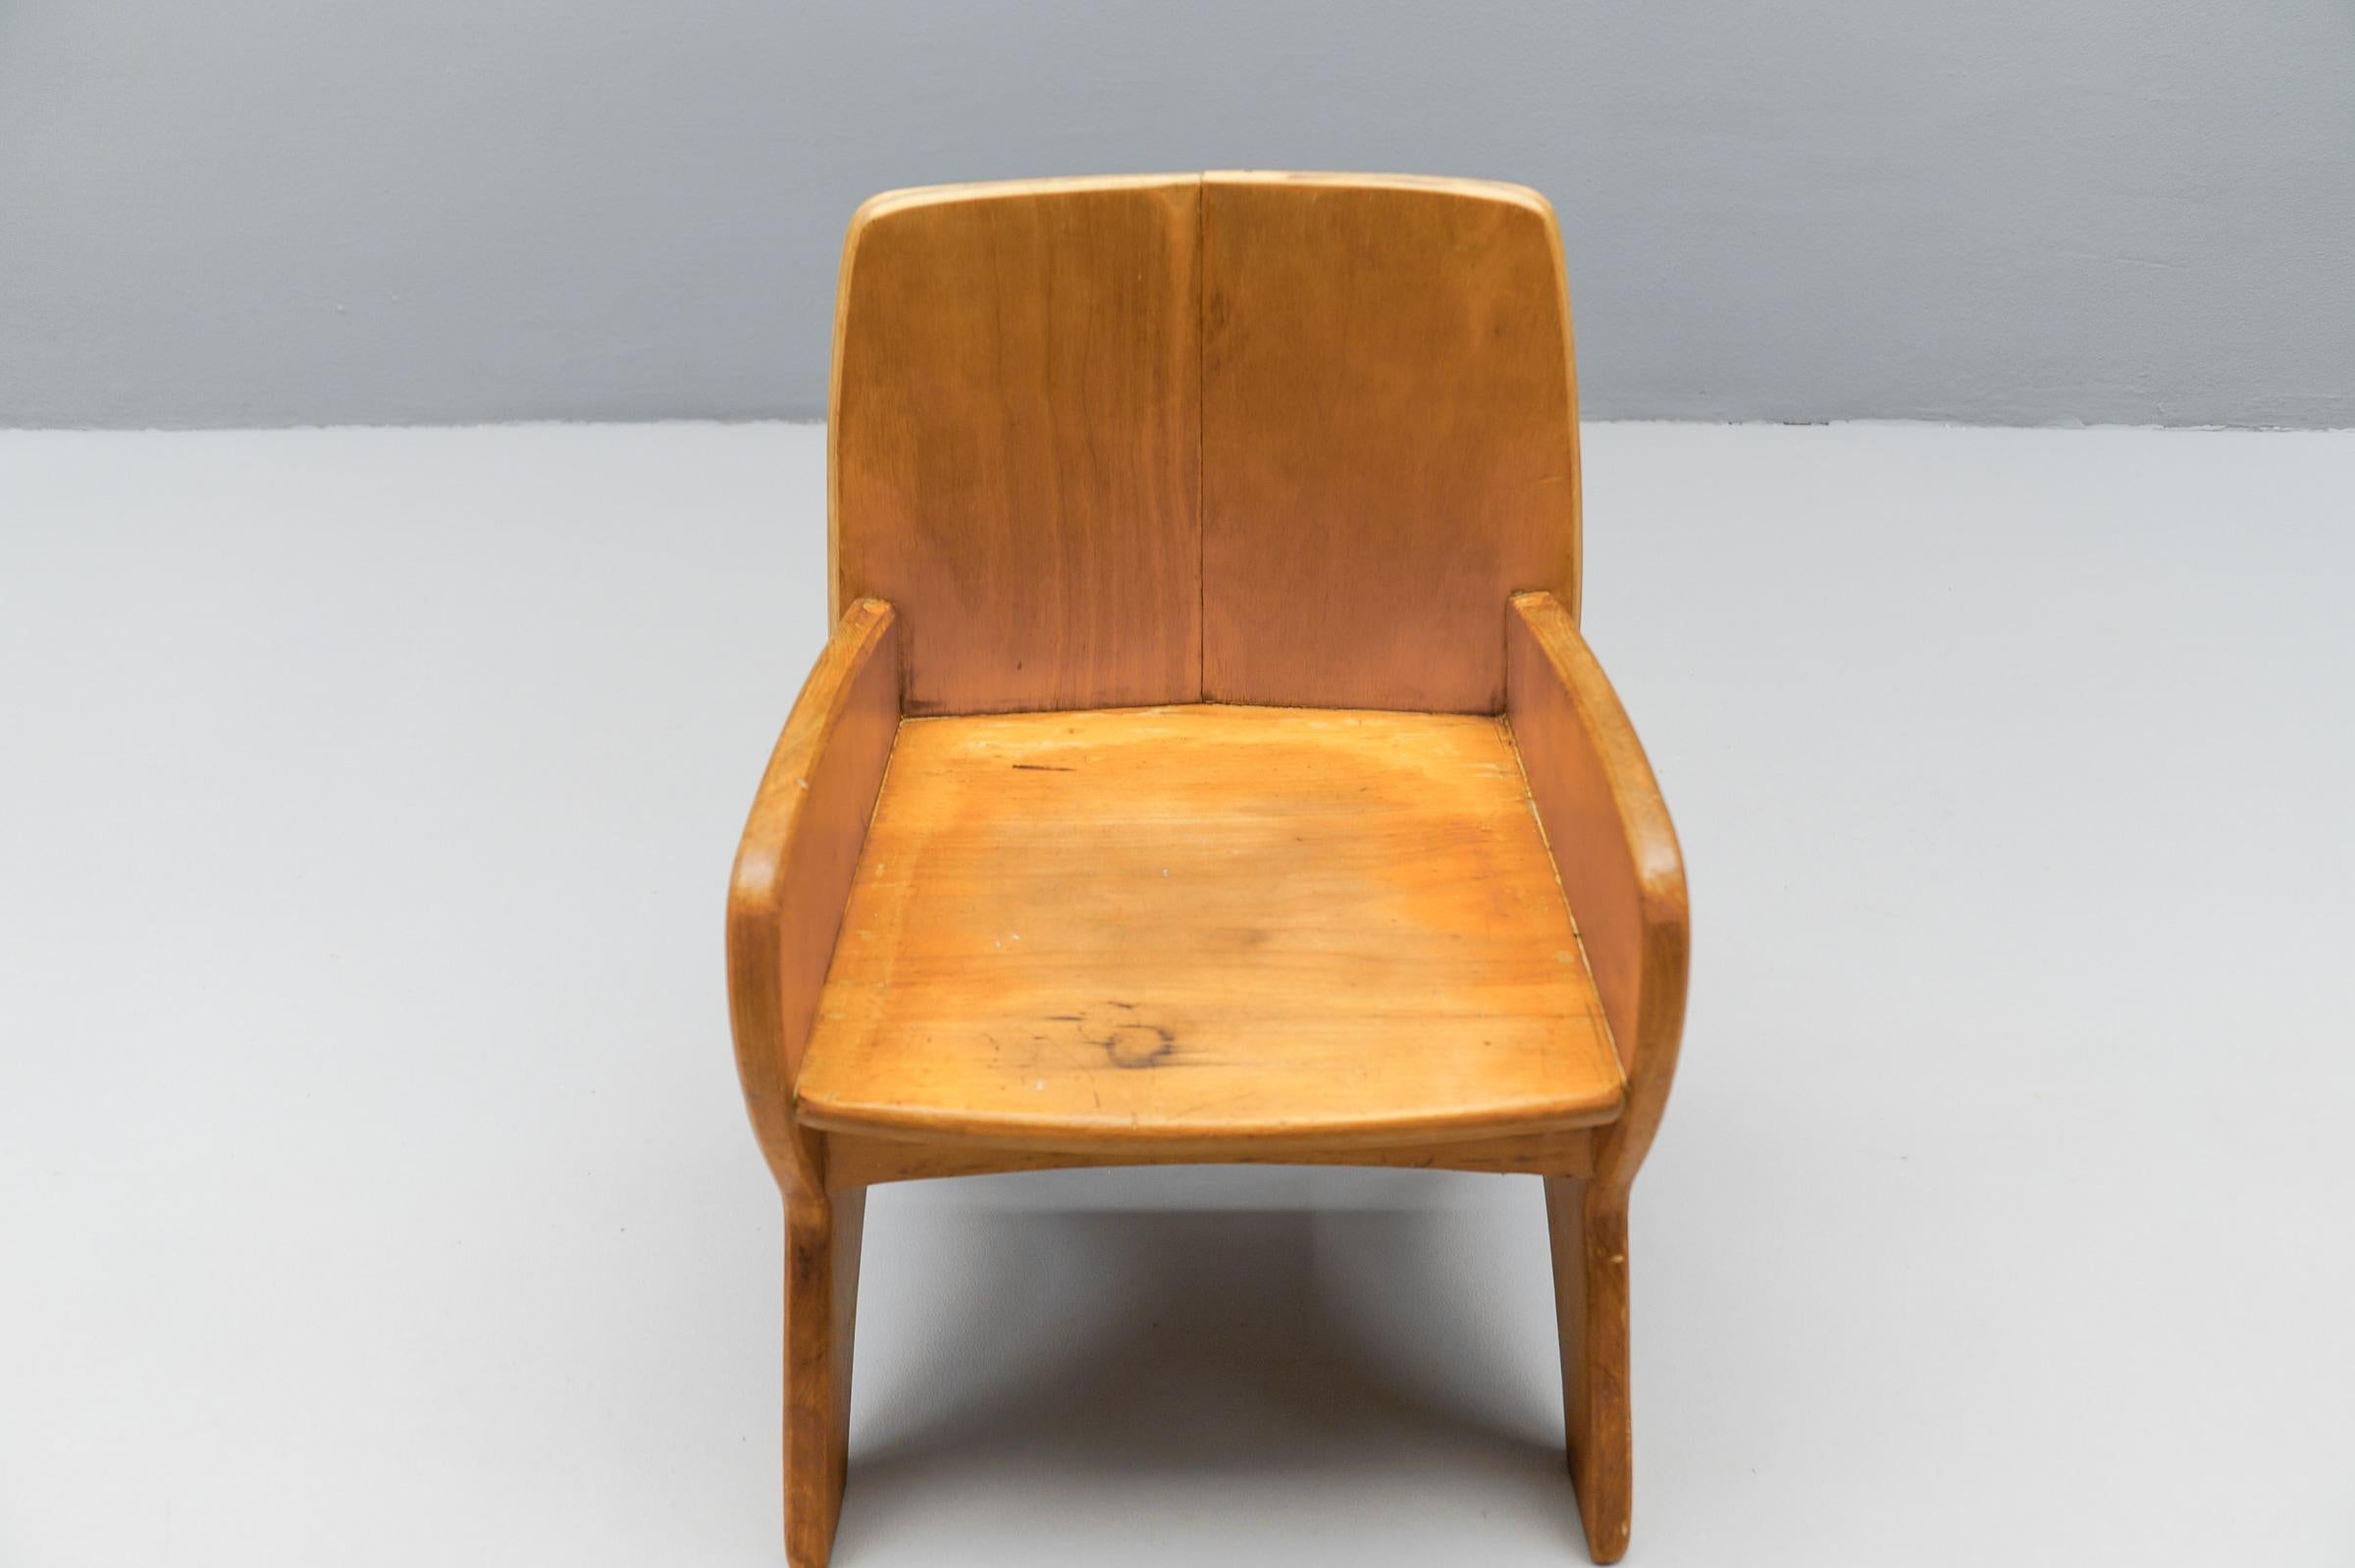 Awesome and Rare Scandinavian Wooden Childs Chair, 1960s For Sale 3